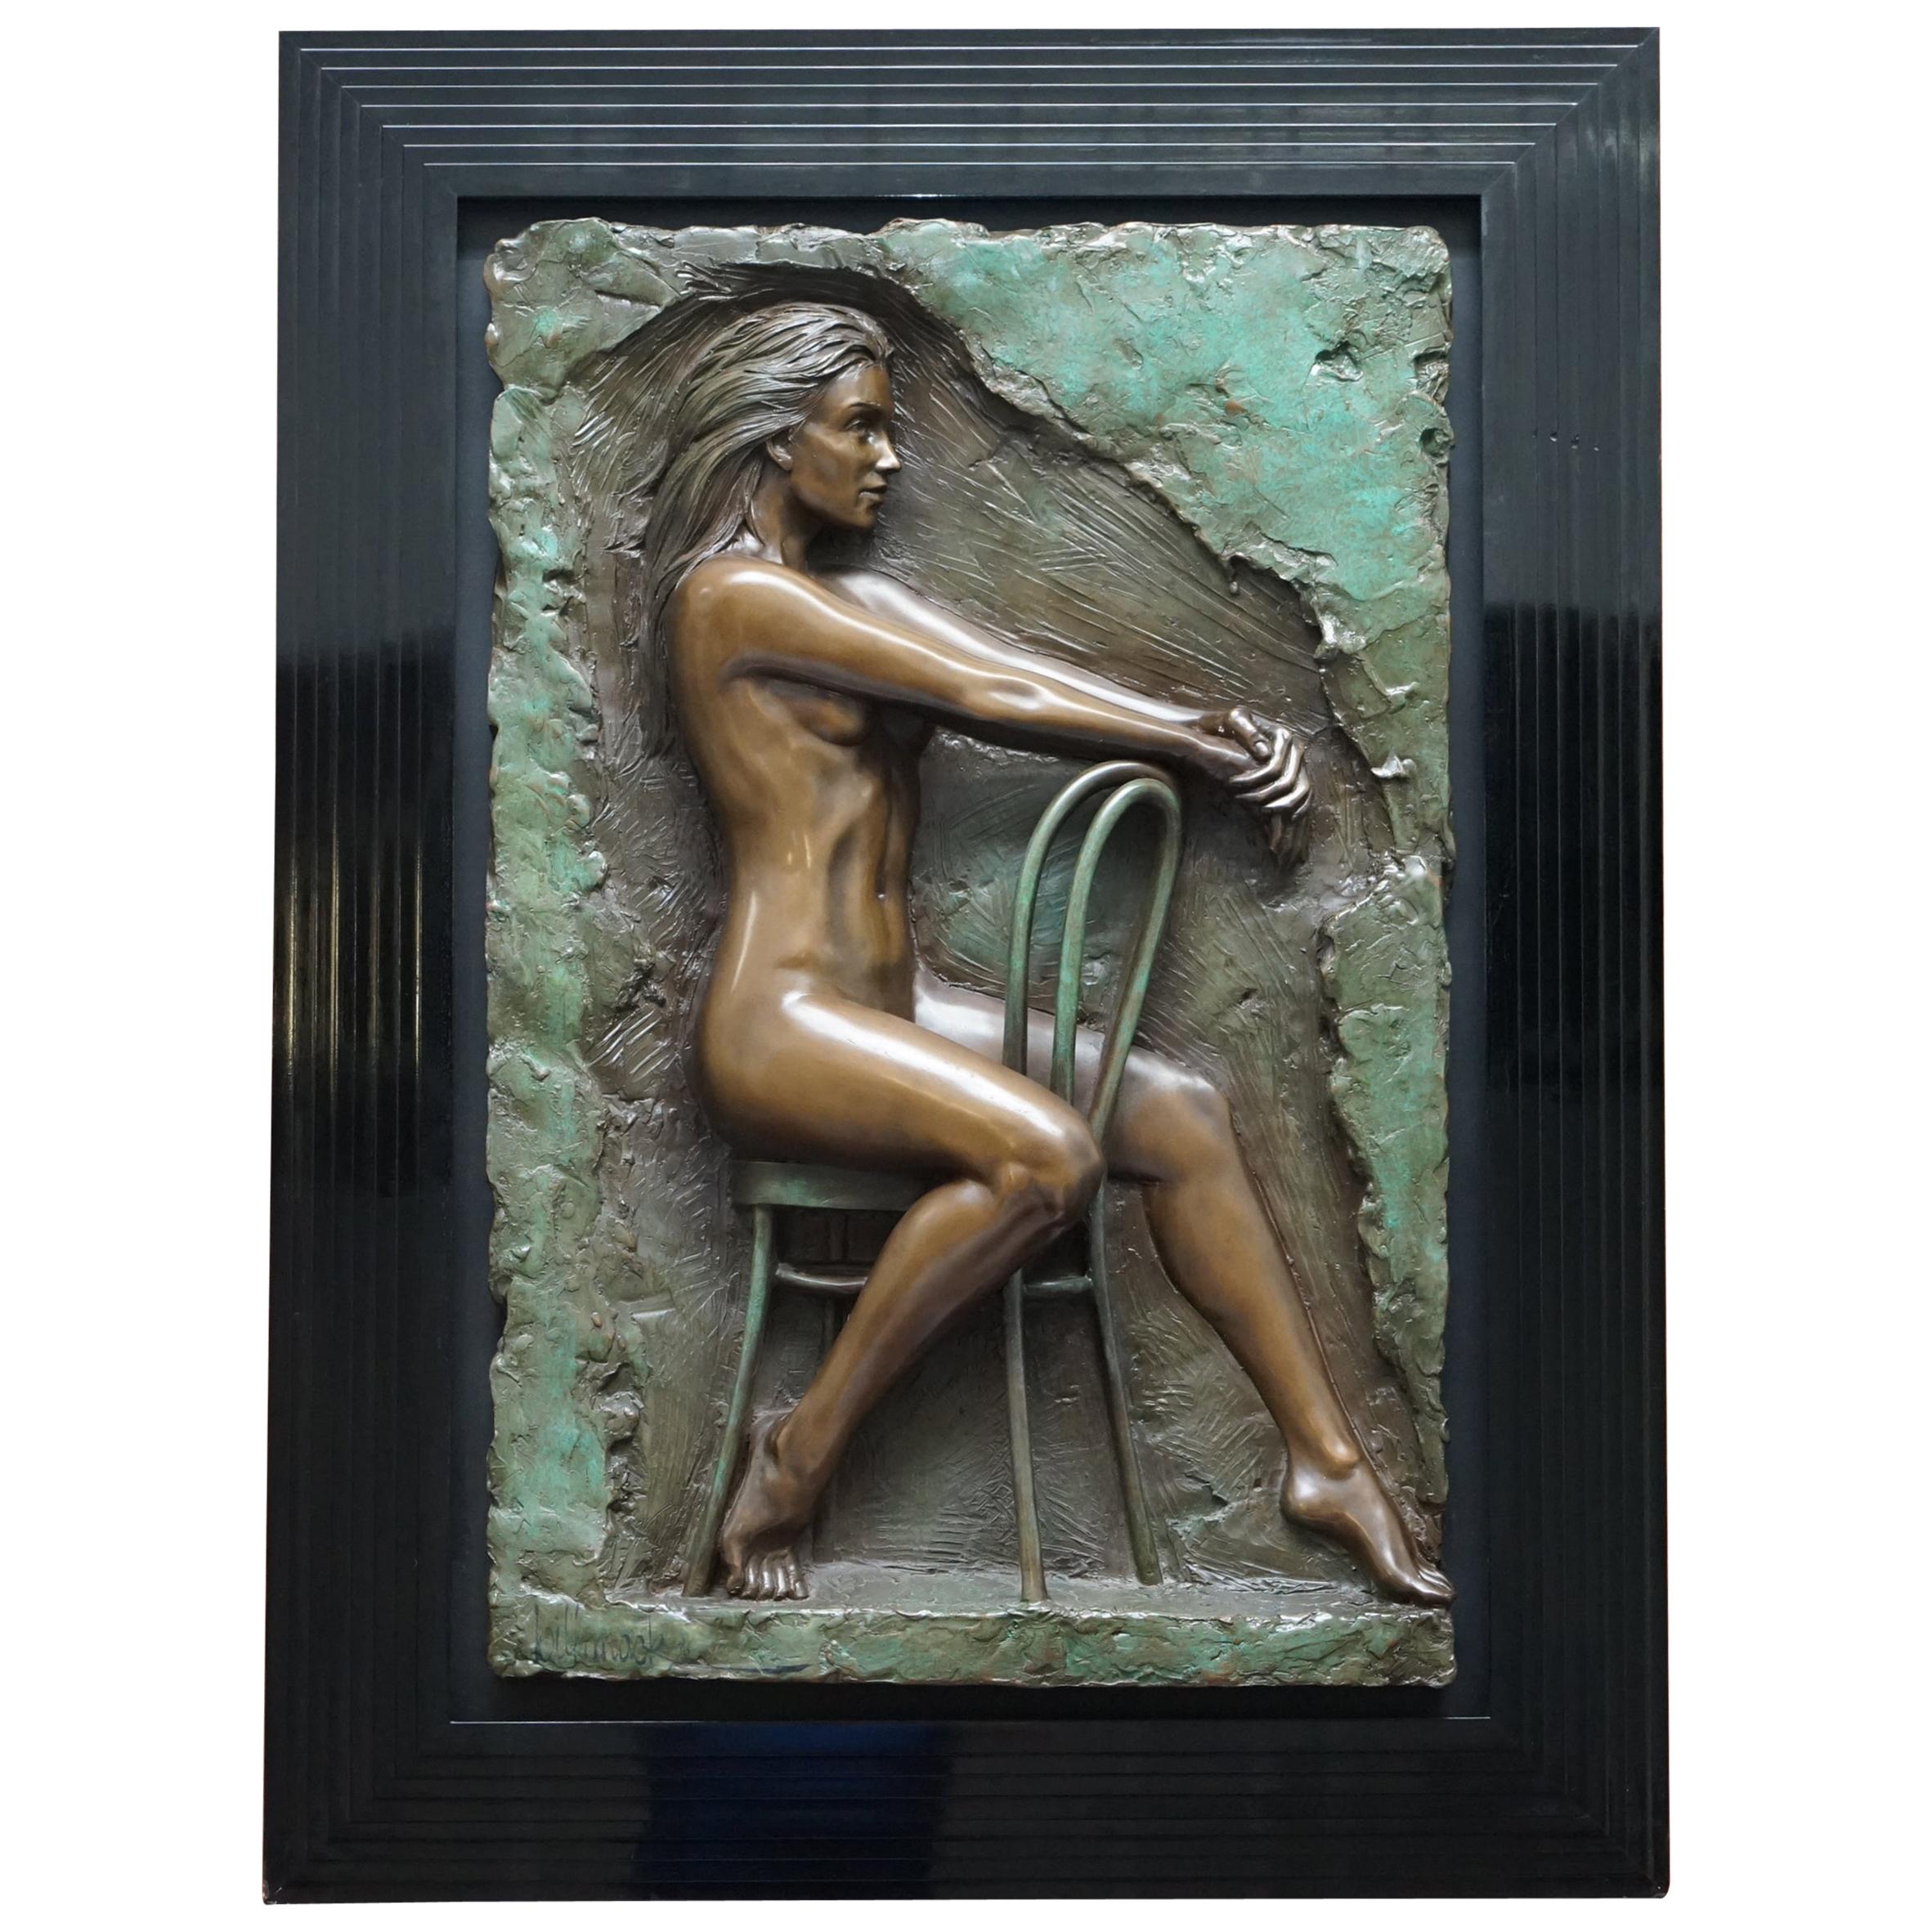 Limited Edition 78/95 Bill Mack Signed Bronze Statue Picture Titled Solitude